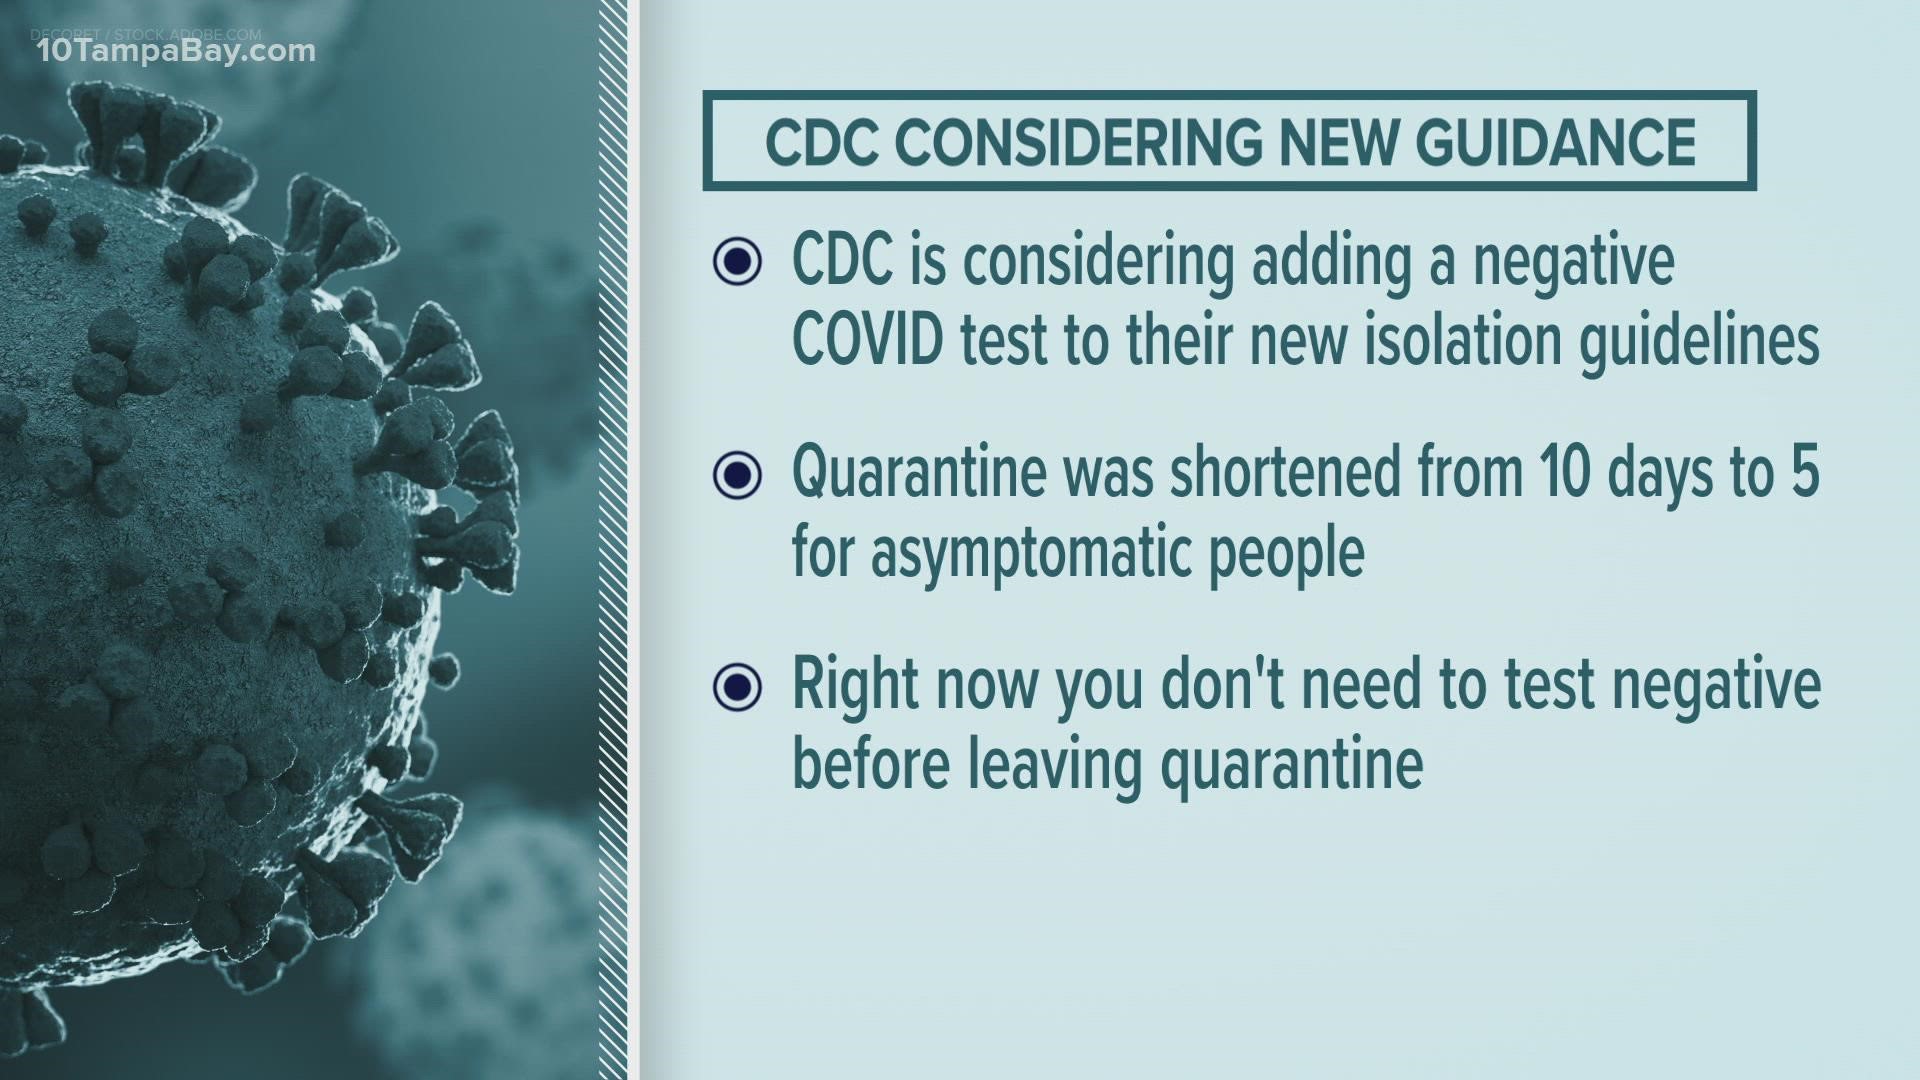 Fauci said the CDC received significant "pushback" after shortening isolation guidelines to 5 days for asymptomatic patients.